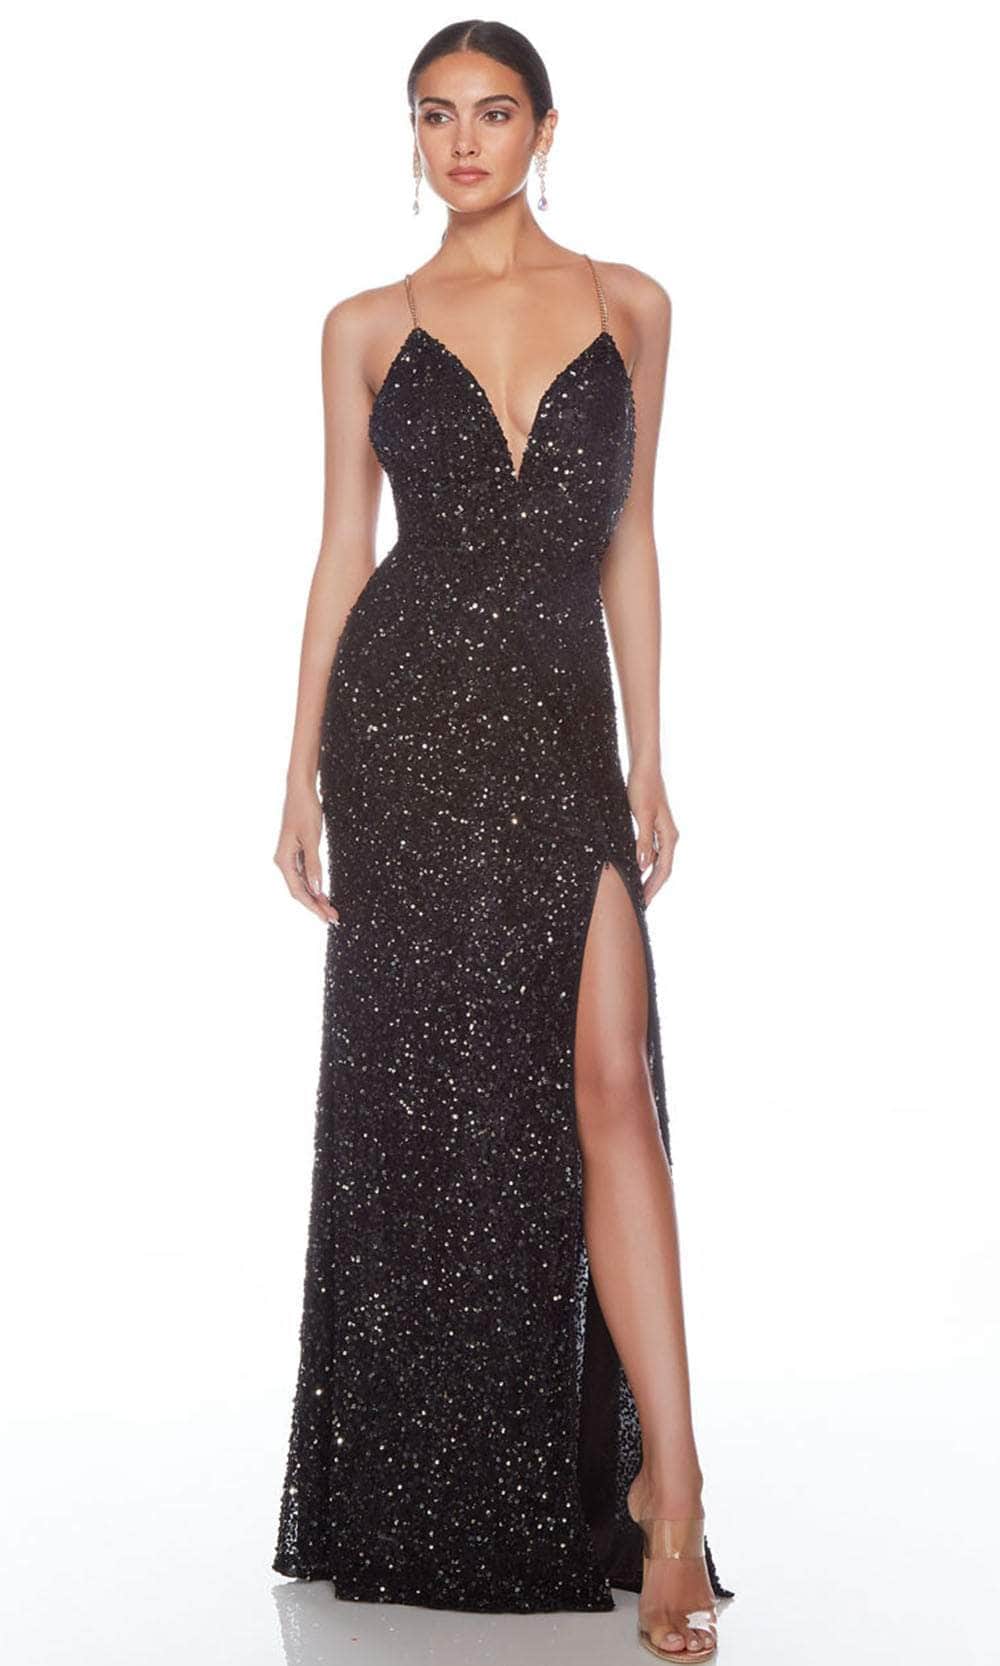 Image of Alyce Paris 88010 - V-Neck Chain Strap Evening Gown